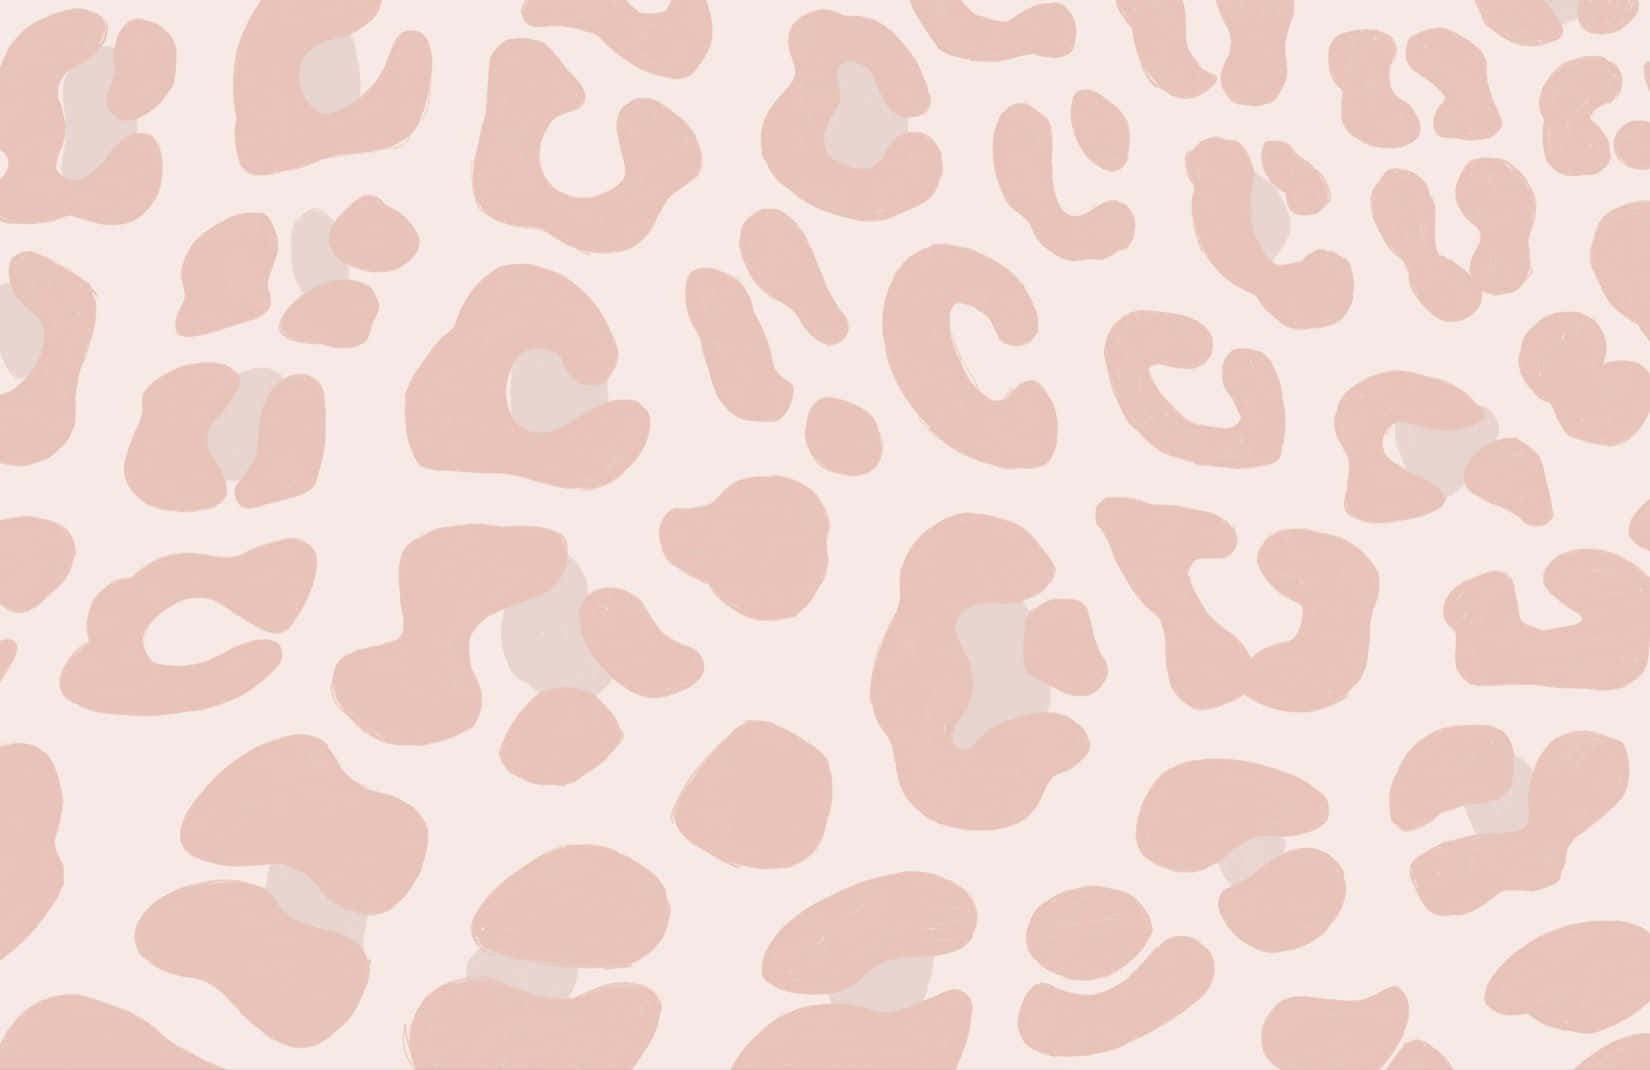 Stand out from the crowd with this stylish leopard print background